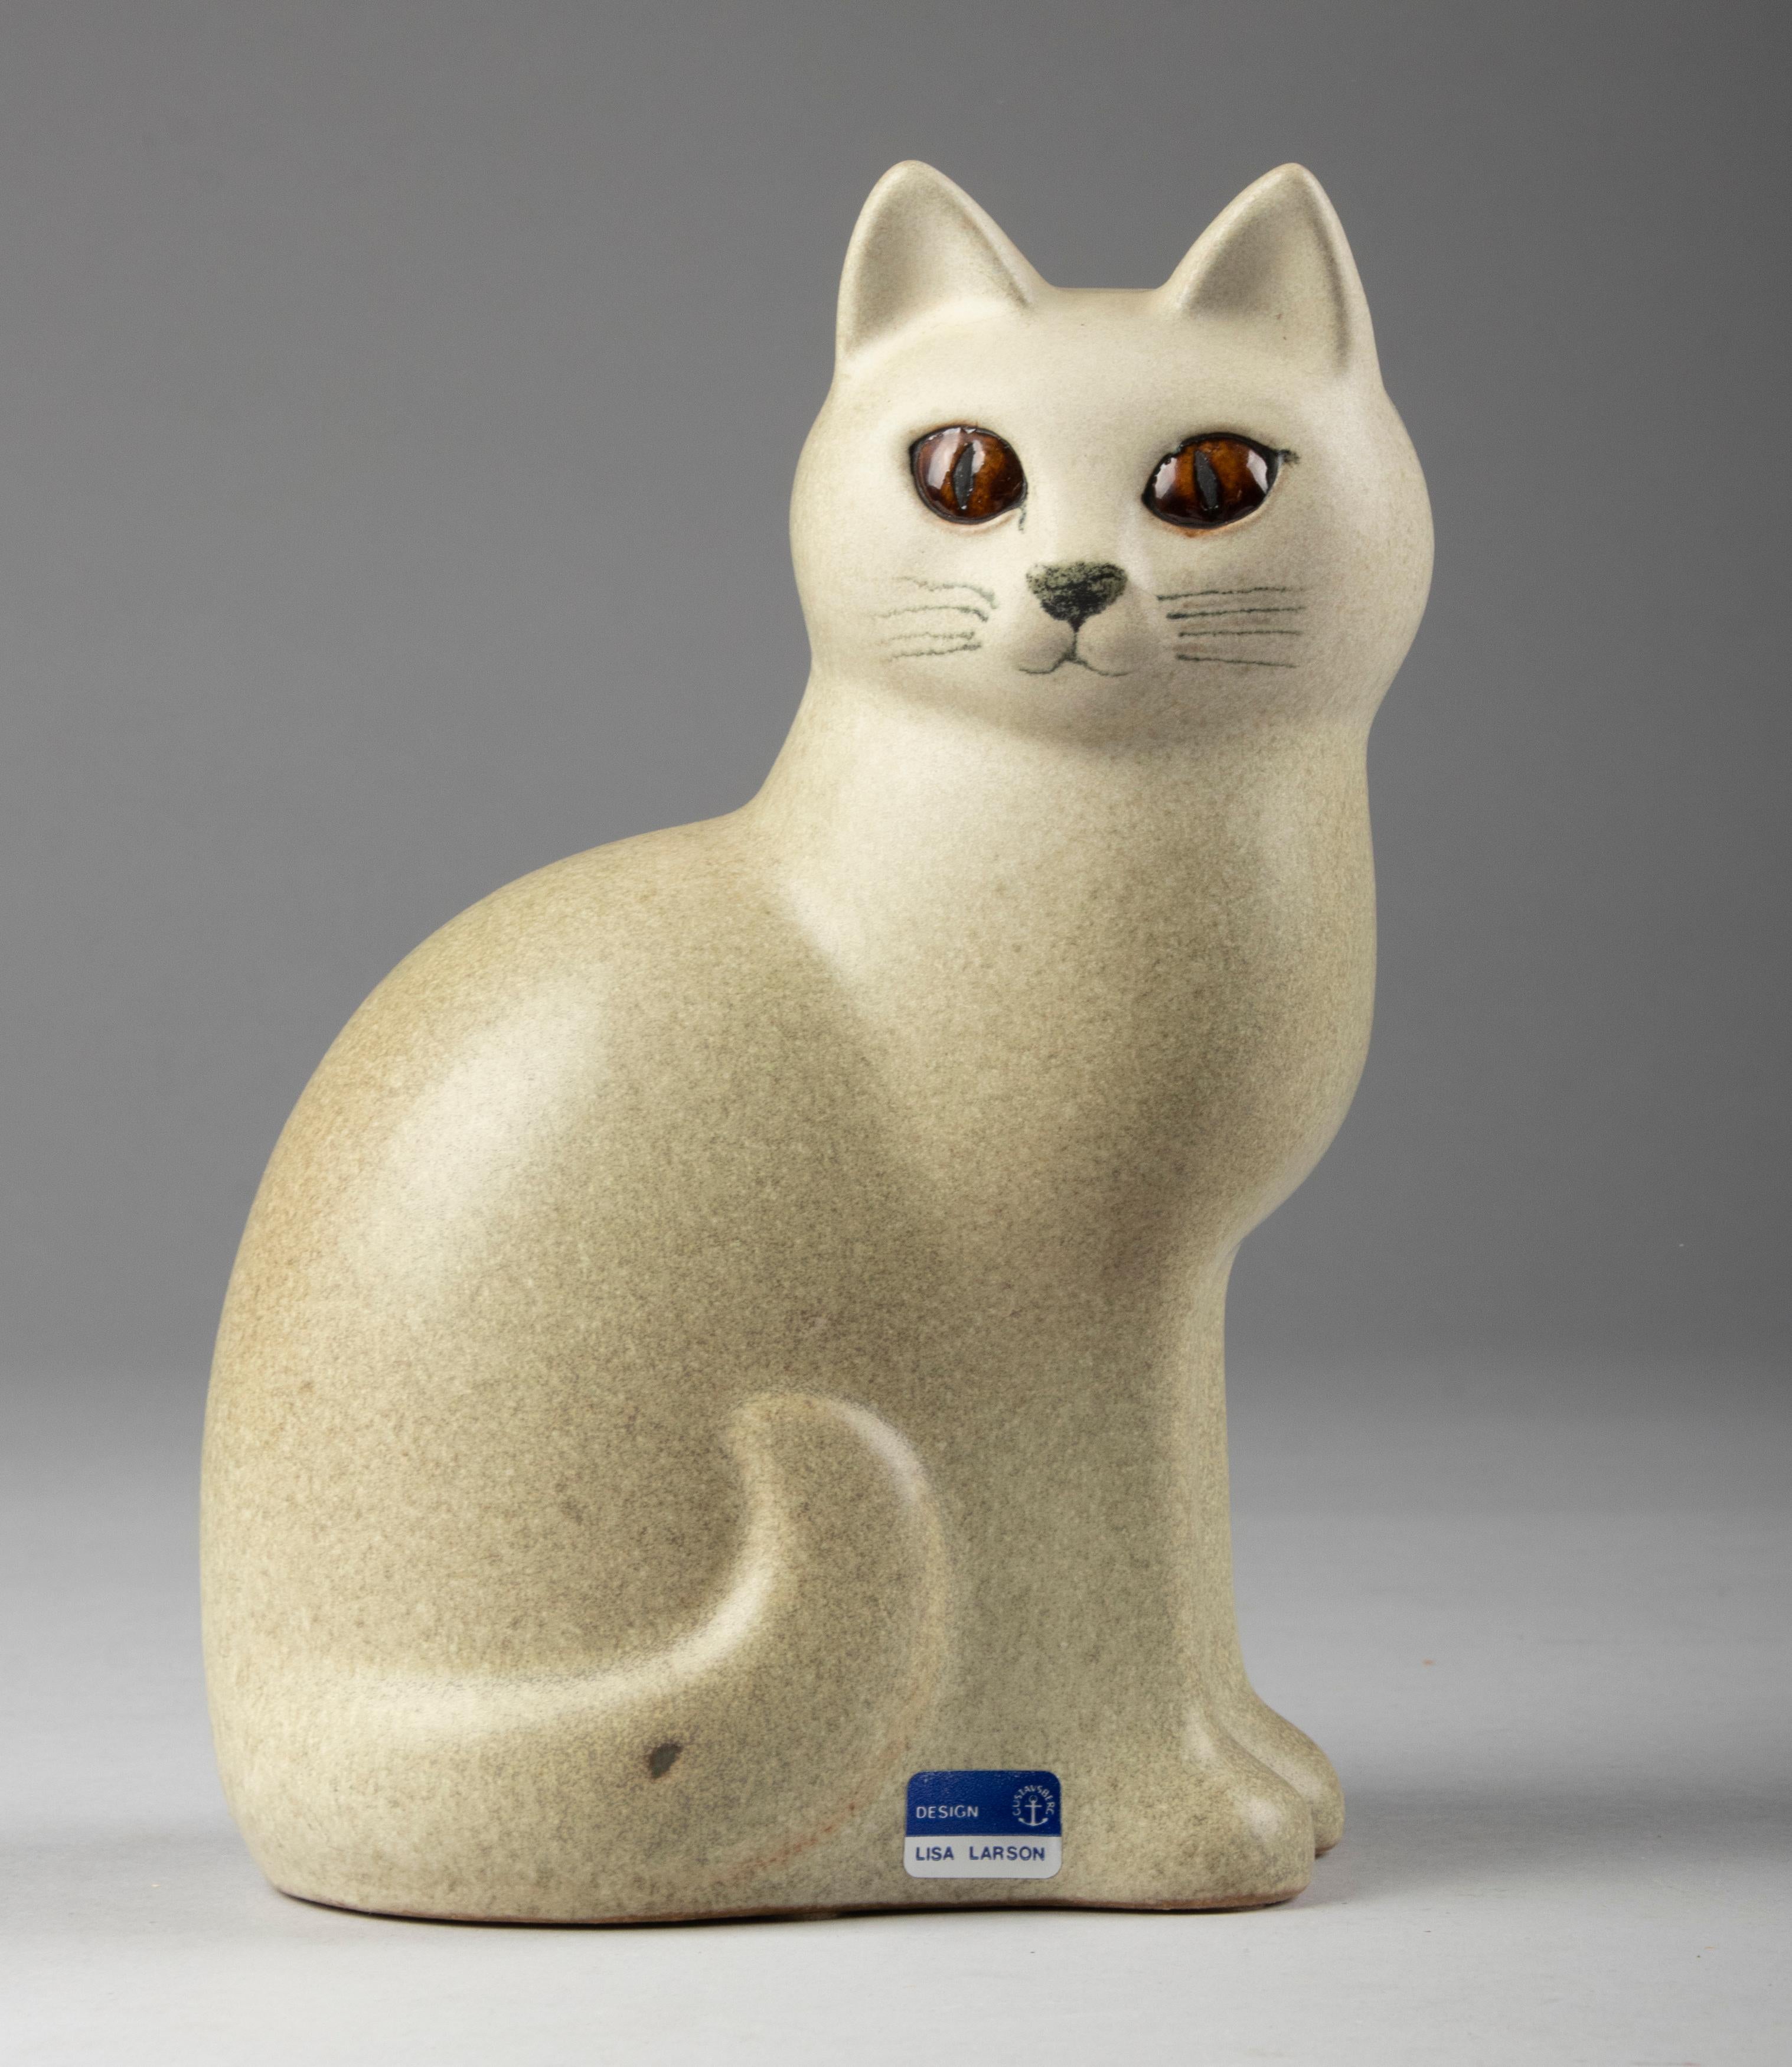 Nice ceramic statue of a cat from Lisa Larson Studio. Lisa Larson is a Swedish ceramic designer who started in Gustavsberg Porcelain Factory in 1953. She is best known for her humorous and friendly characters. This piece is in very good condition.